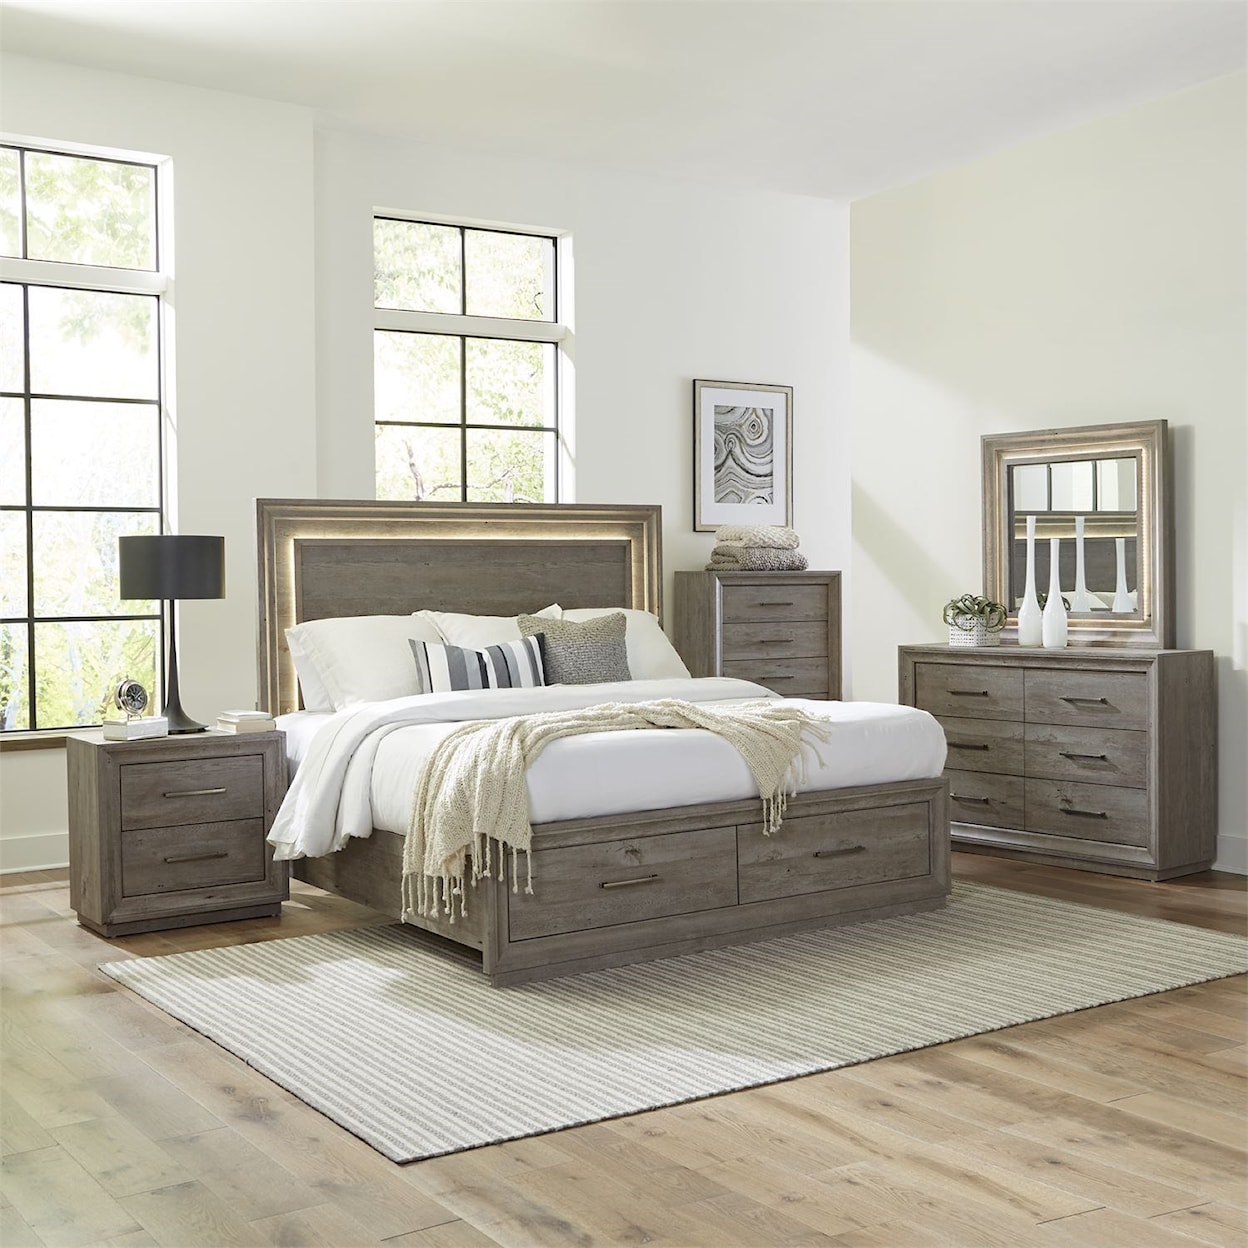 Libby Horizons King Storage Bed